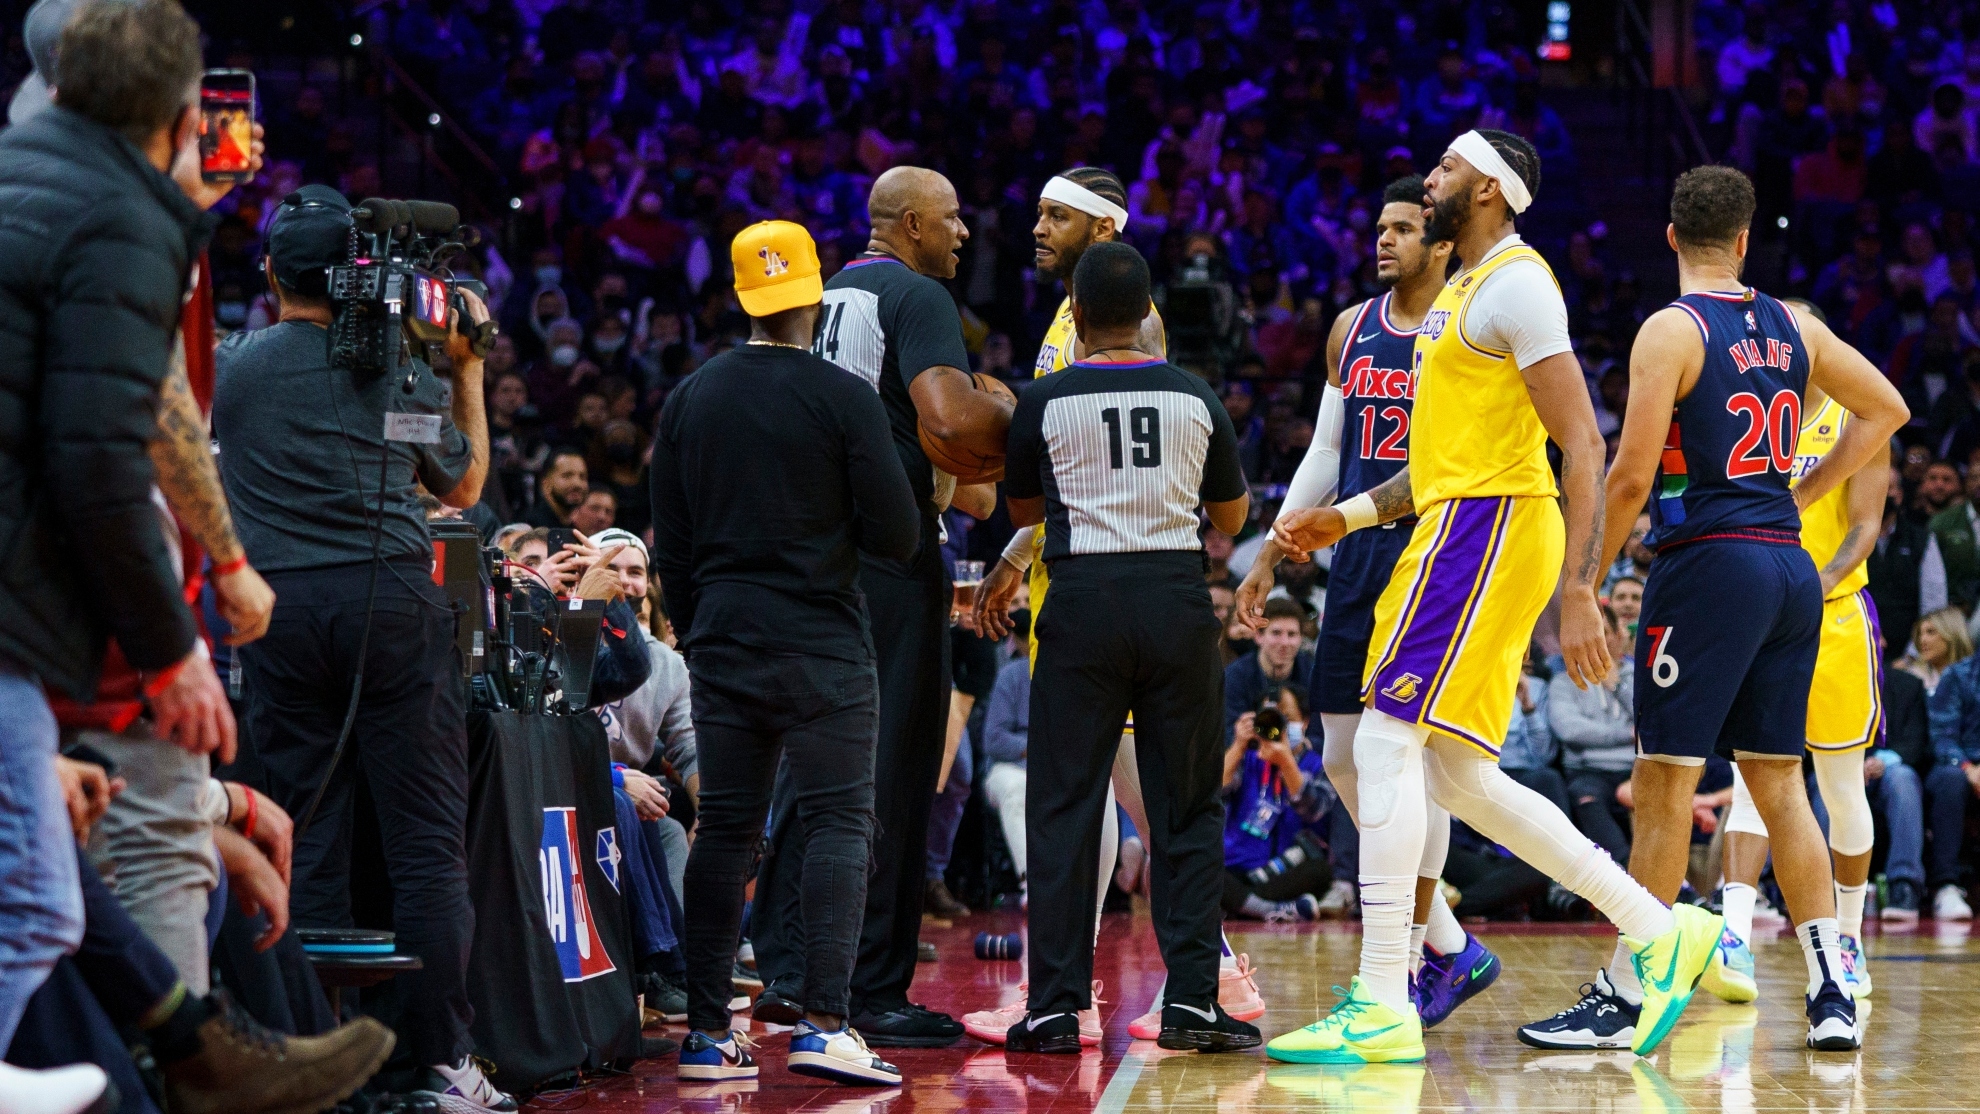 Los Angeles Lakers Carmelo Anthony, top center, is held back by officials after having a word with a fan in the stands during the second half of an NBA basketball game against the Philadelphia 76ers